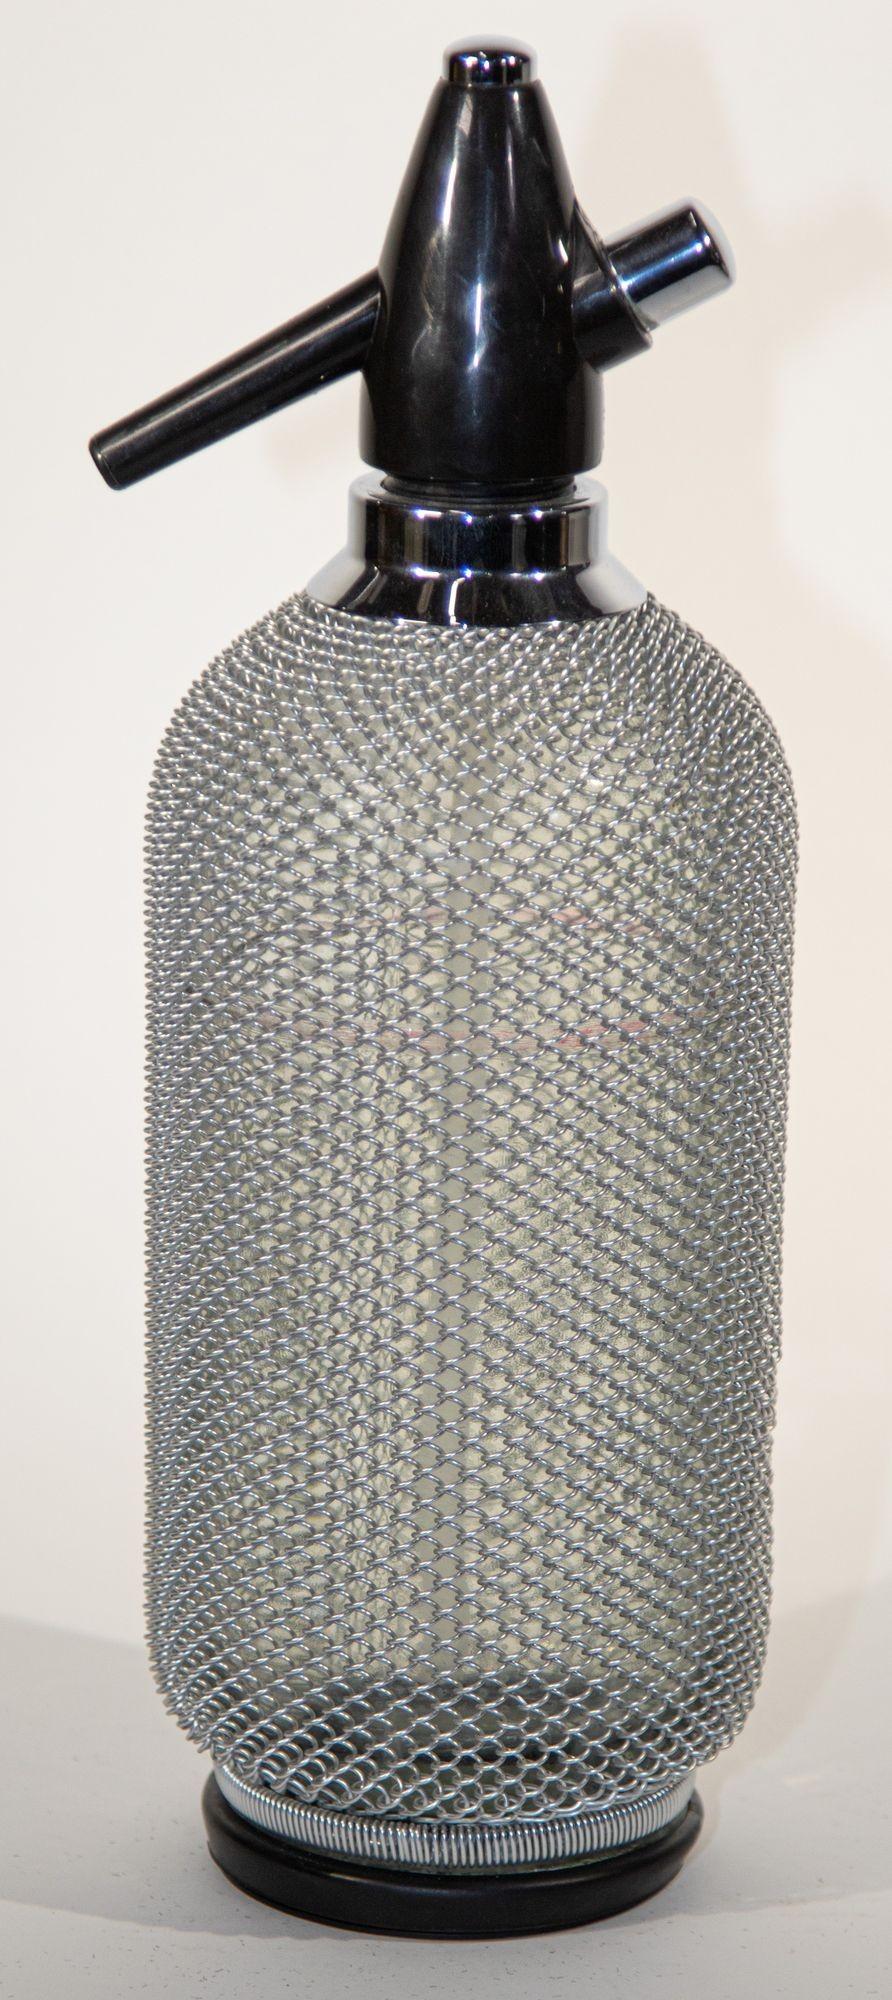 Vintage Classic Soda Siphon Seltzer Glass Bottle with Wire Mesh For Sale 7